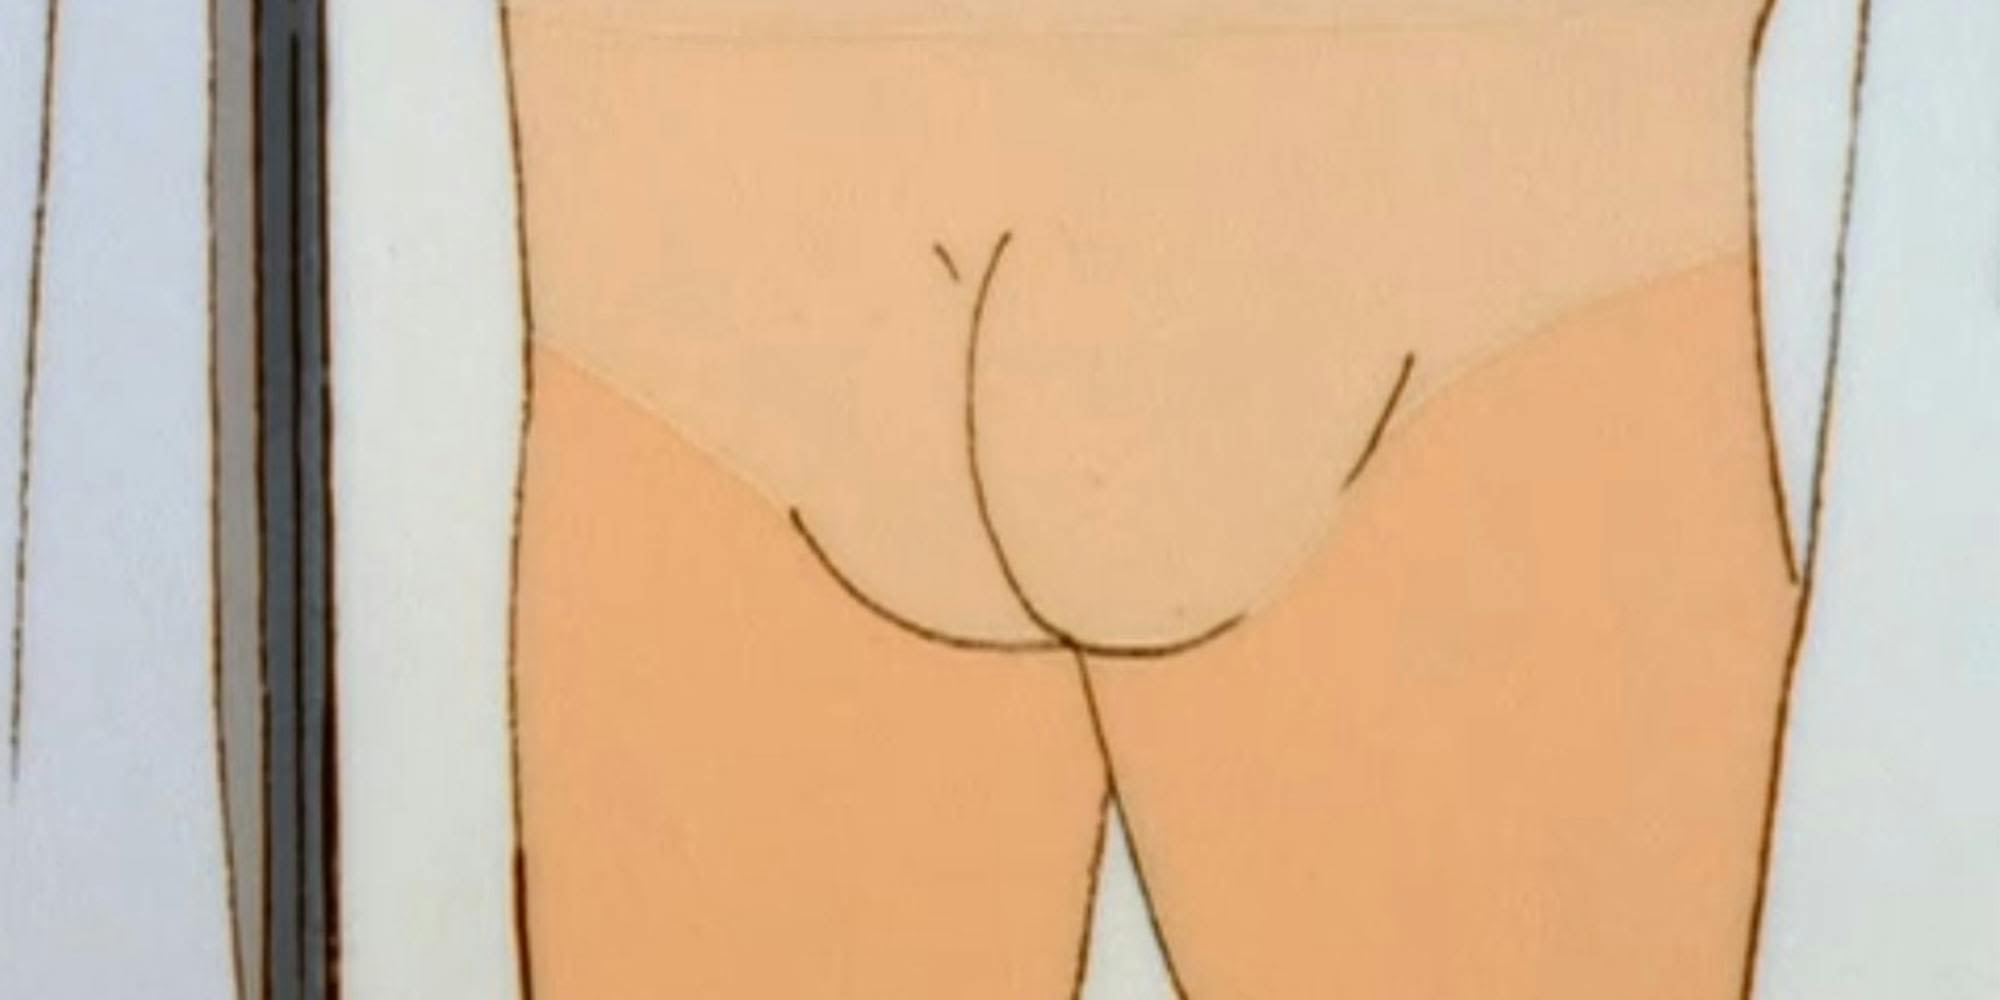 What's a 'Hank Hill Butt' and do you have one?